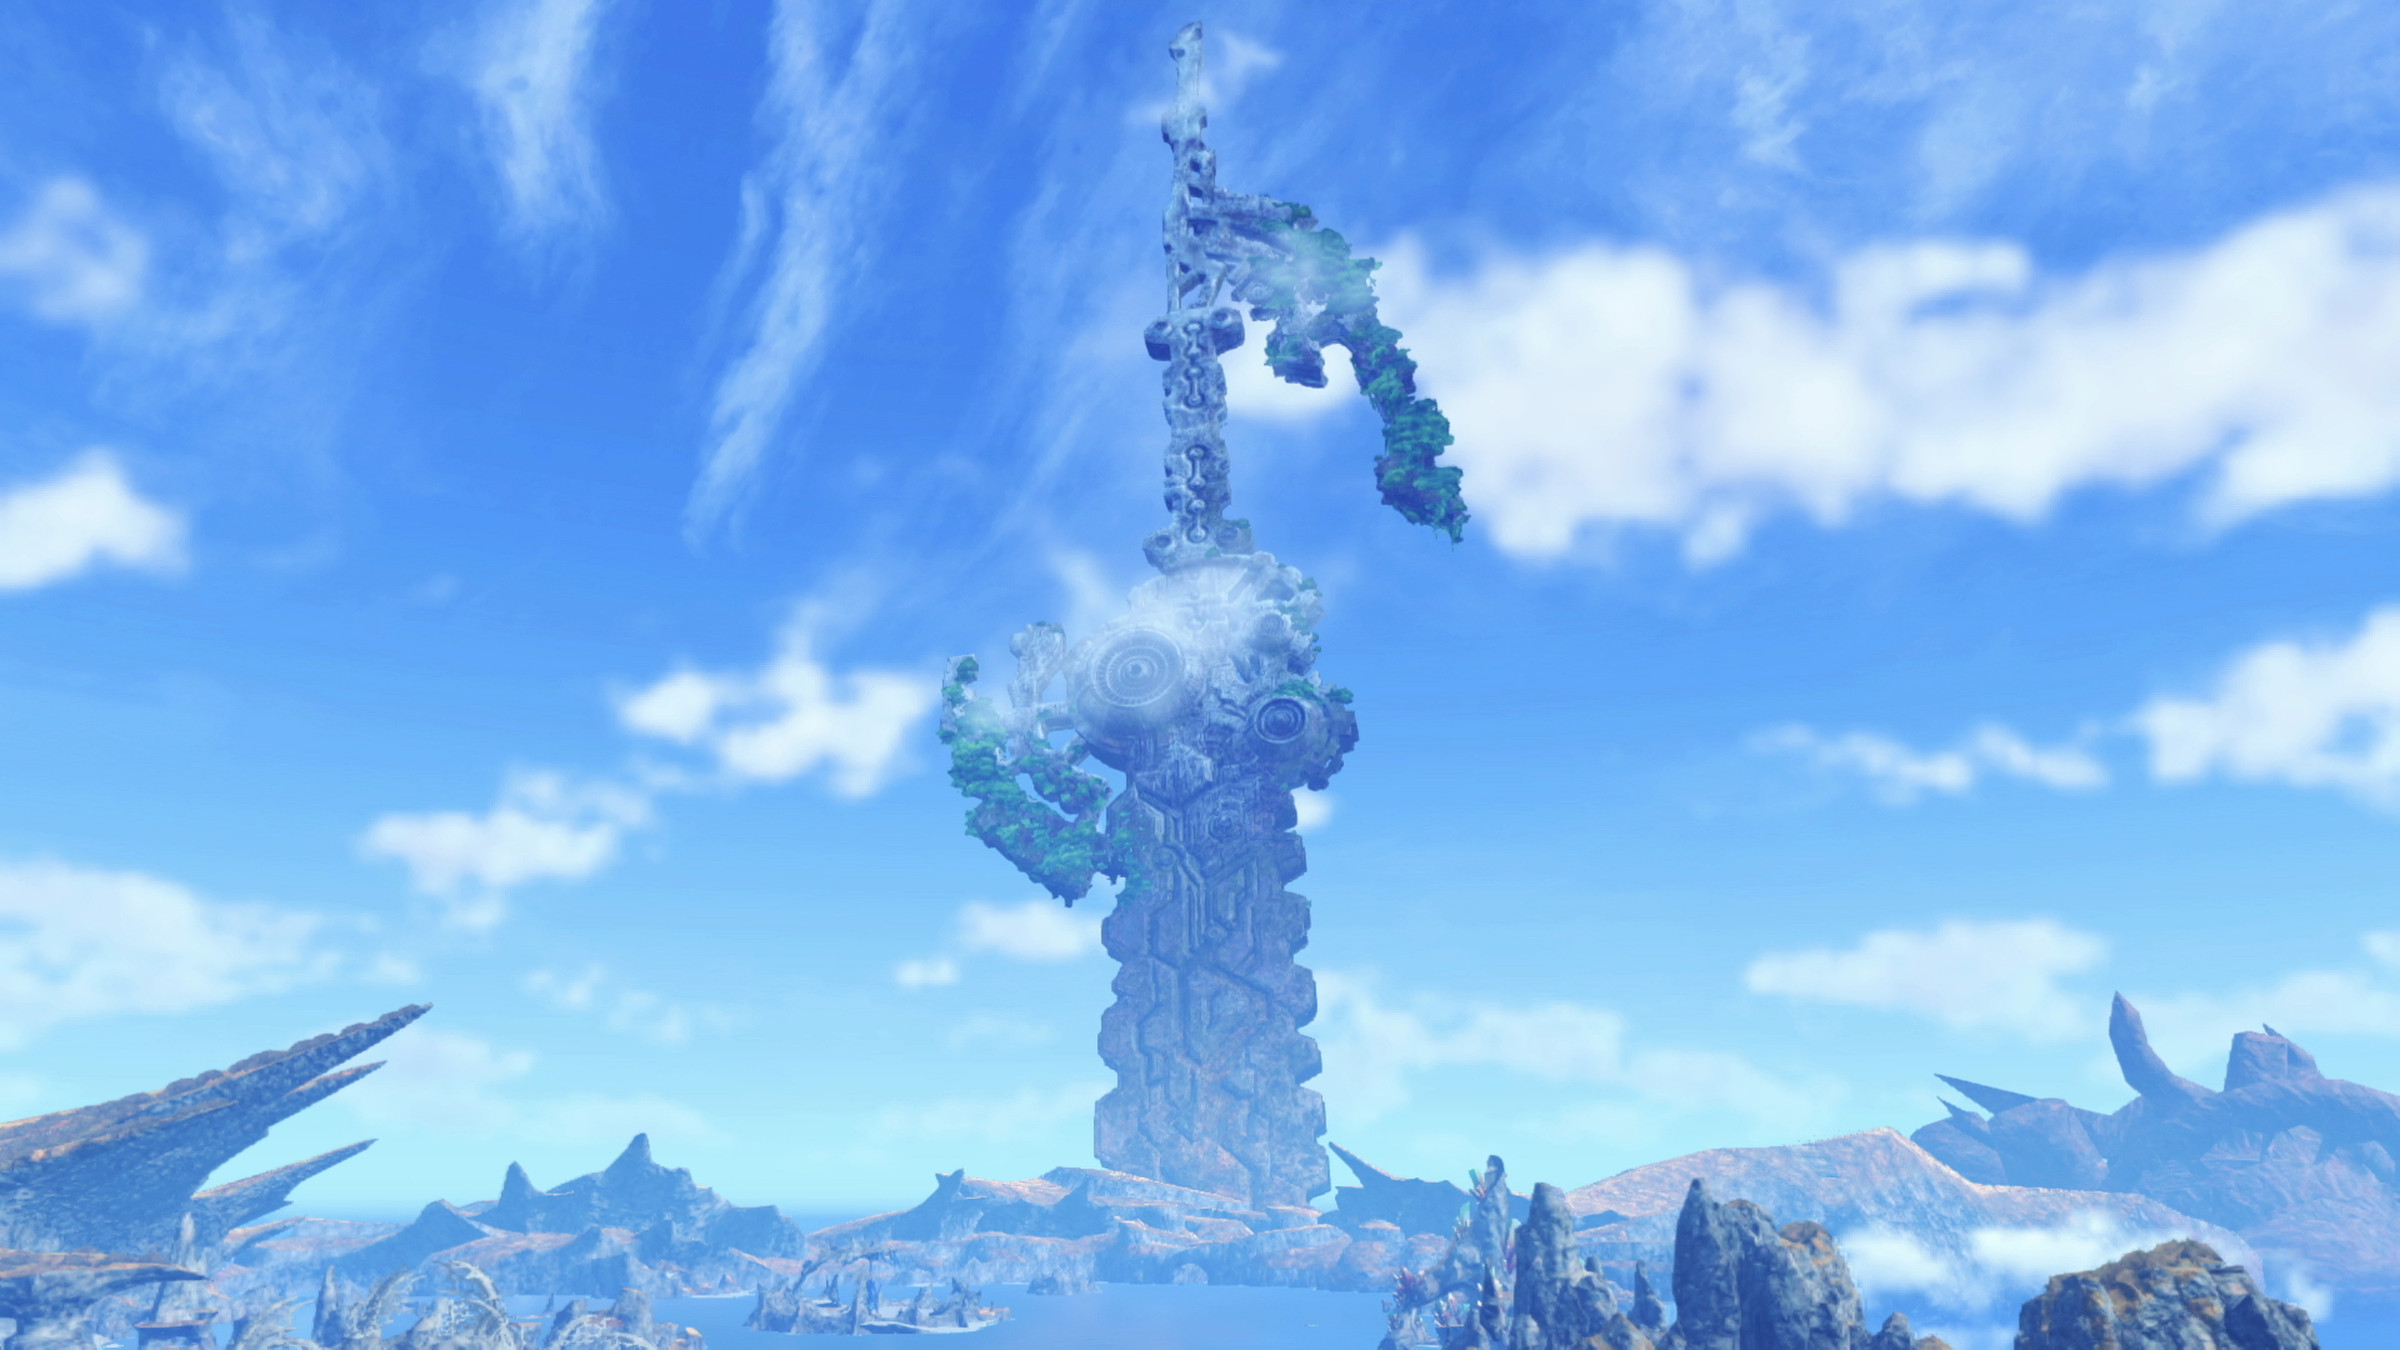 Screenshot of Xenoblade Chronicles 3 featuring the massive Xenoblade sword mountain far off in the distance.